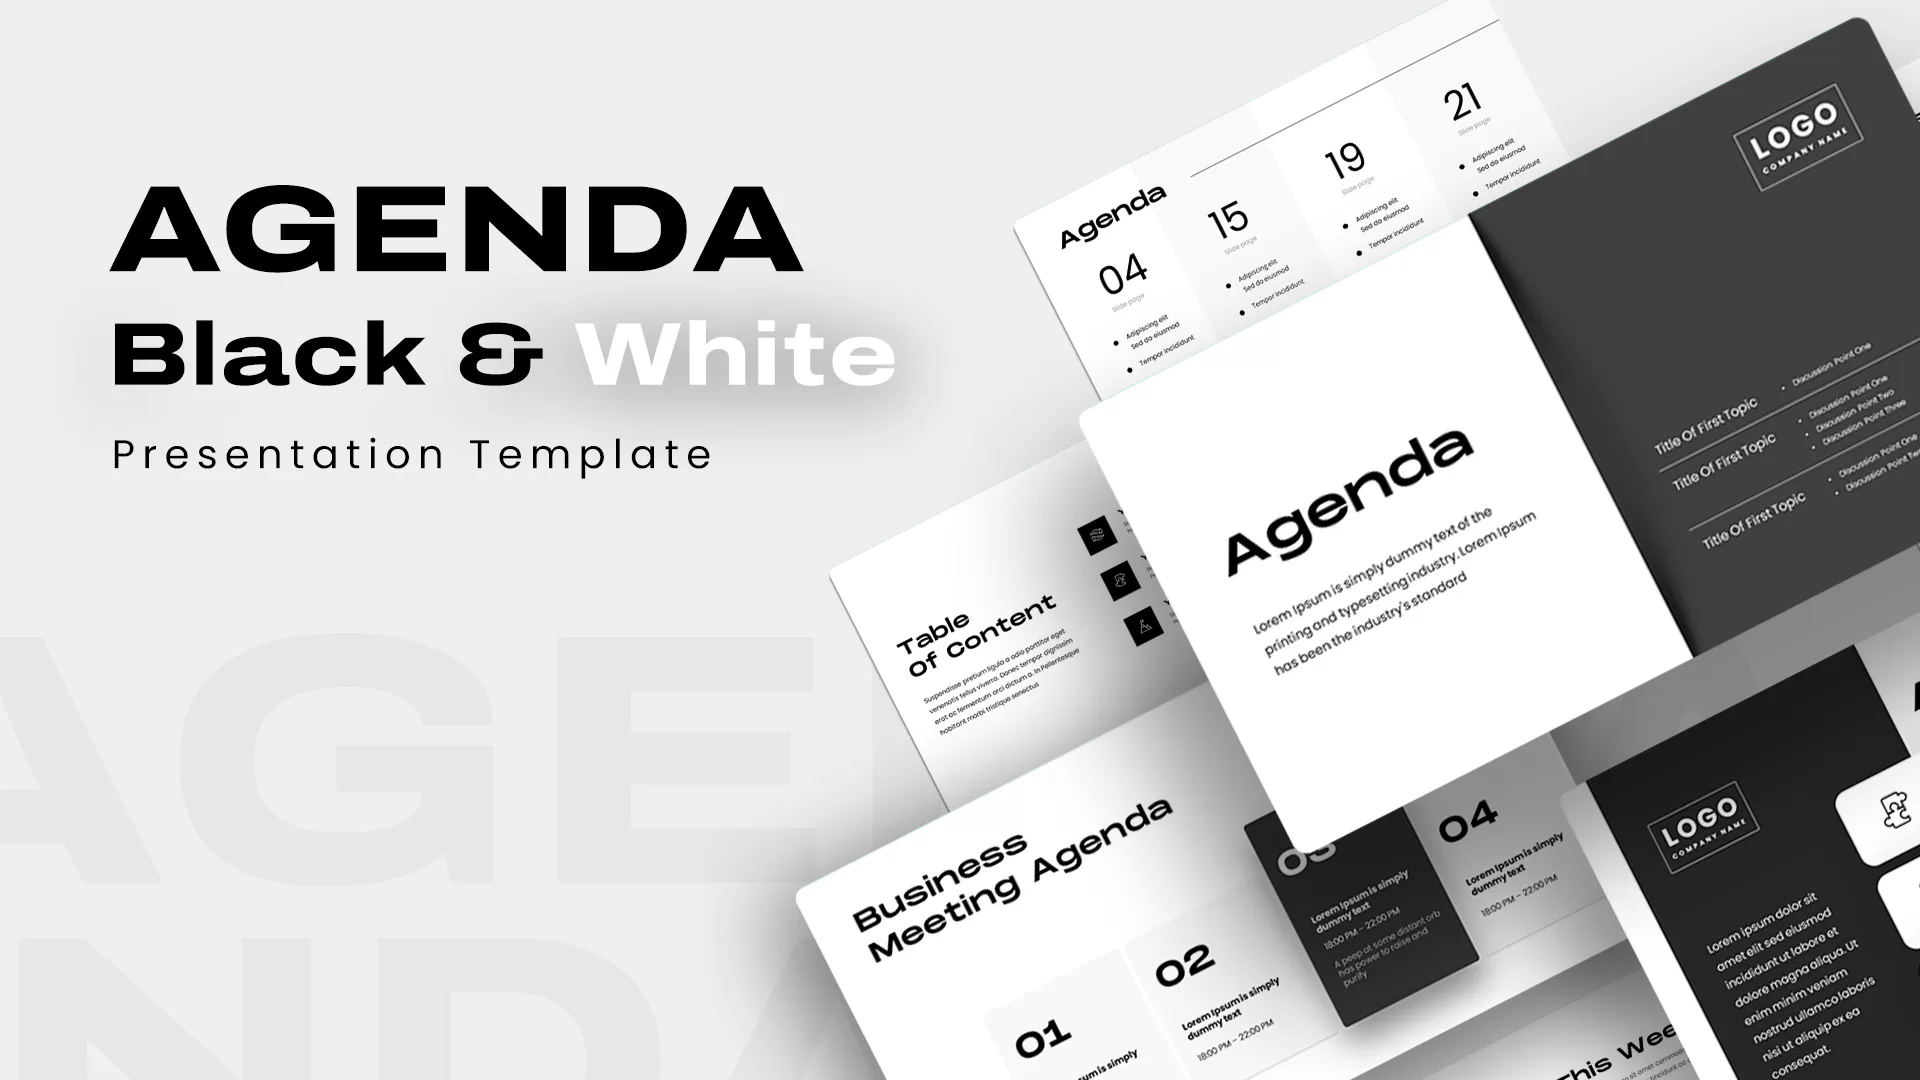 Meeting Agenda Template Black and White